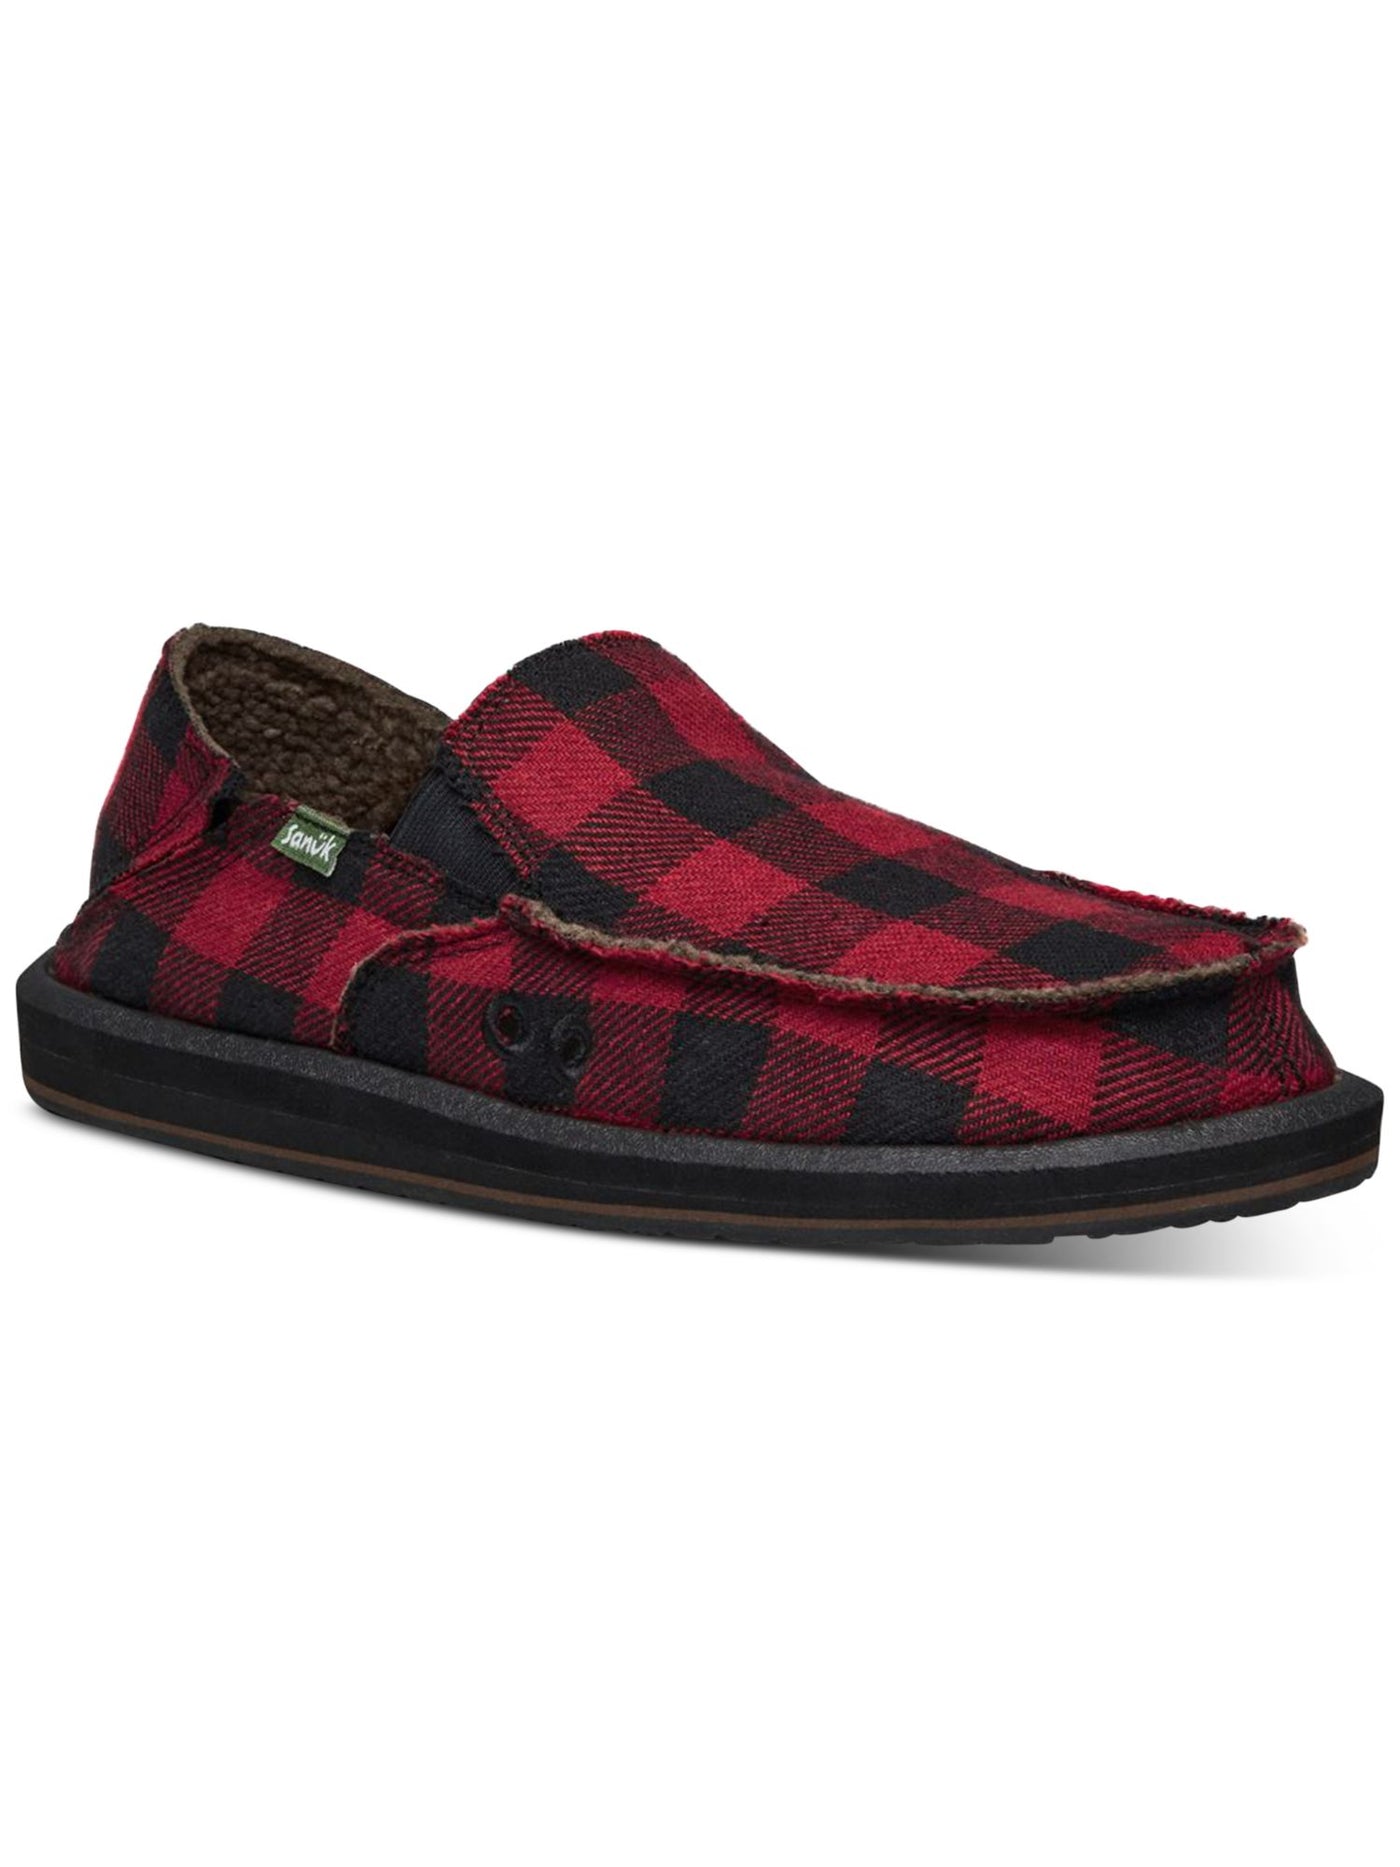 SANUK Mens Red Plaid Buffalo Padded Goring Comfort Vagabond Chill Round Toe Slip On Loafers Shoes 7